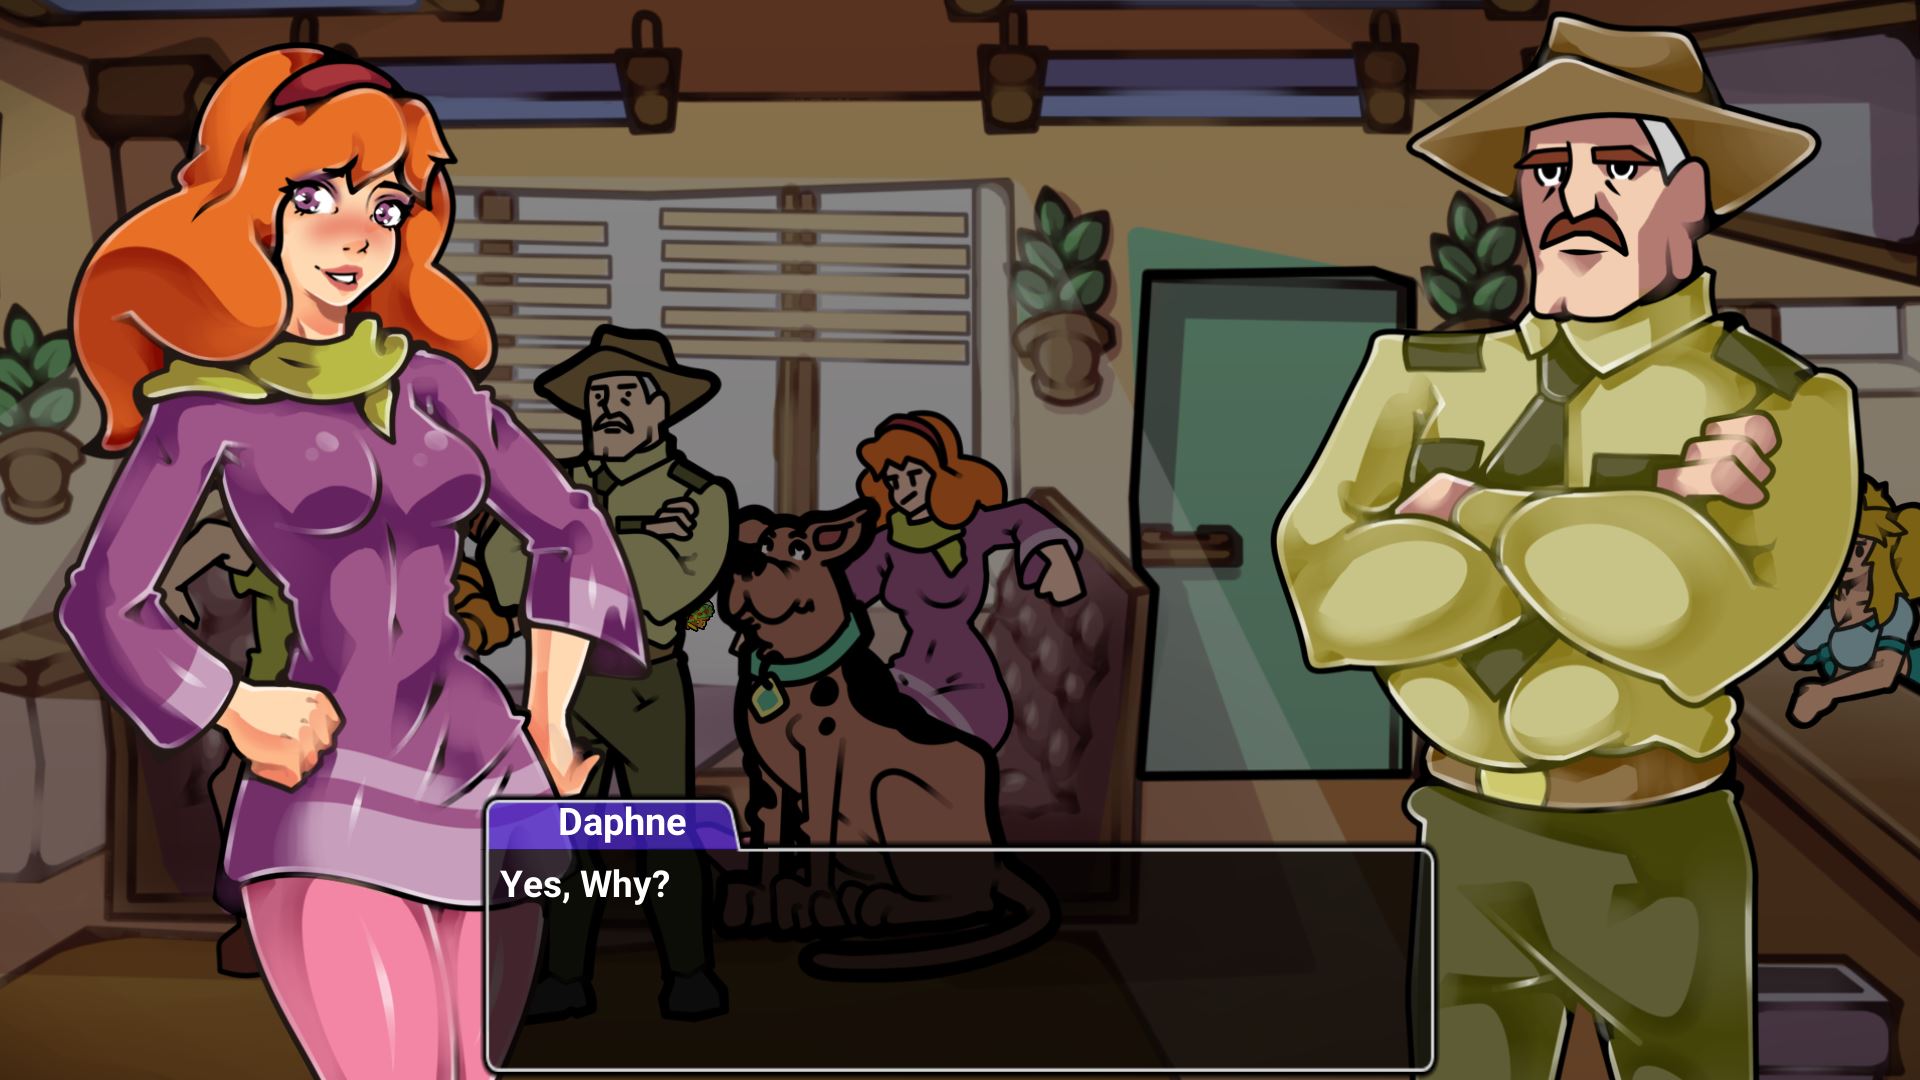 Free Scooby Doo Sex Games - Unity] Scooby-Doo! A Depraved Investigation - v2 by The Dark Forest 18+ Adult  xxx Porn Game Download